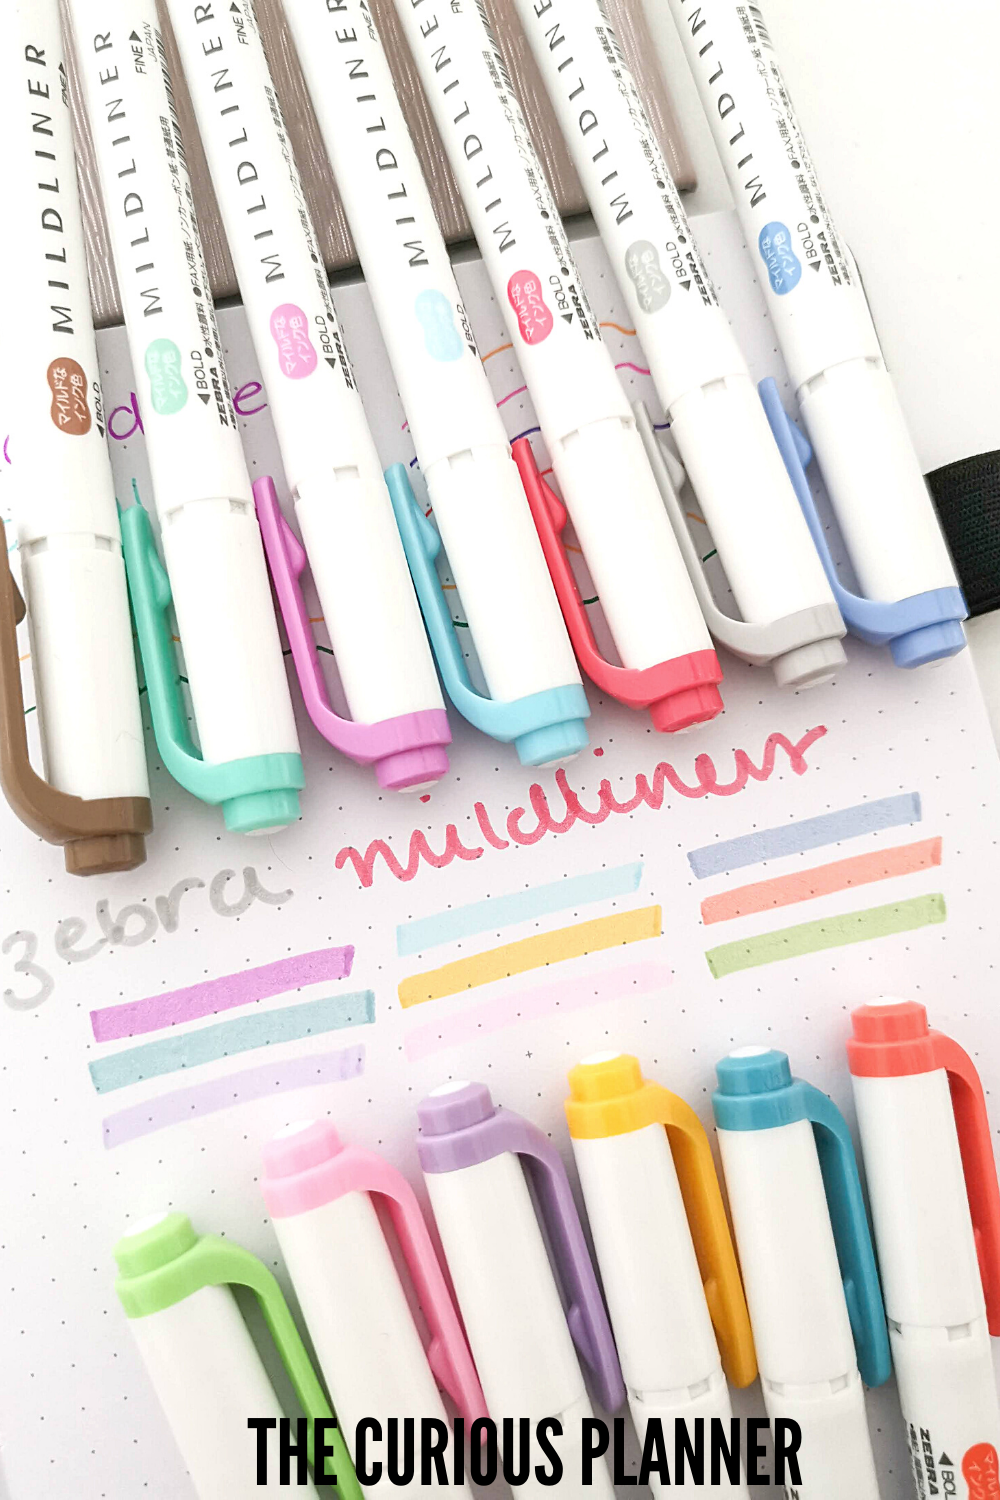 Best highlighters for bullet journaling – All About Planners